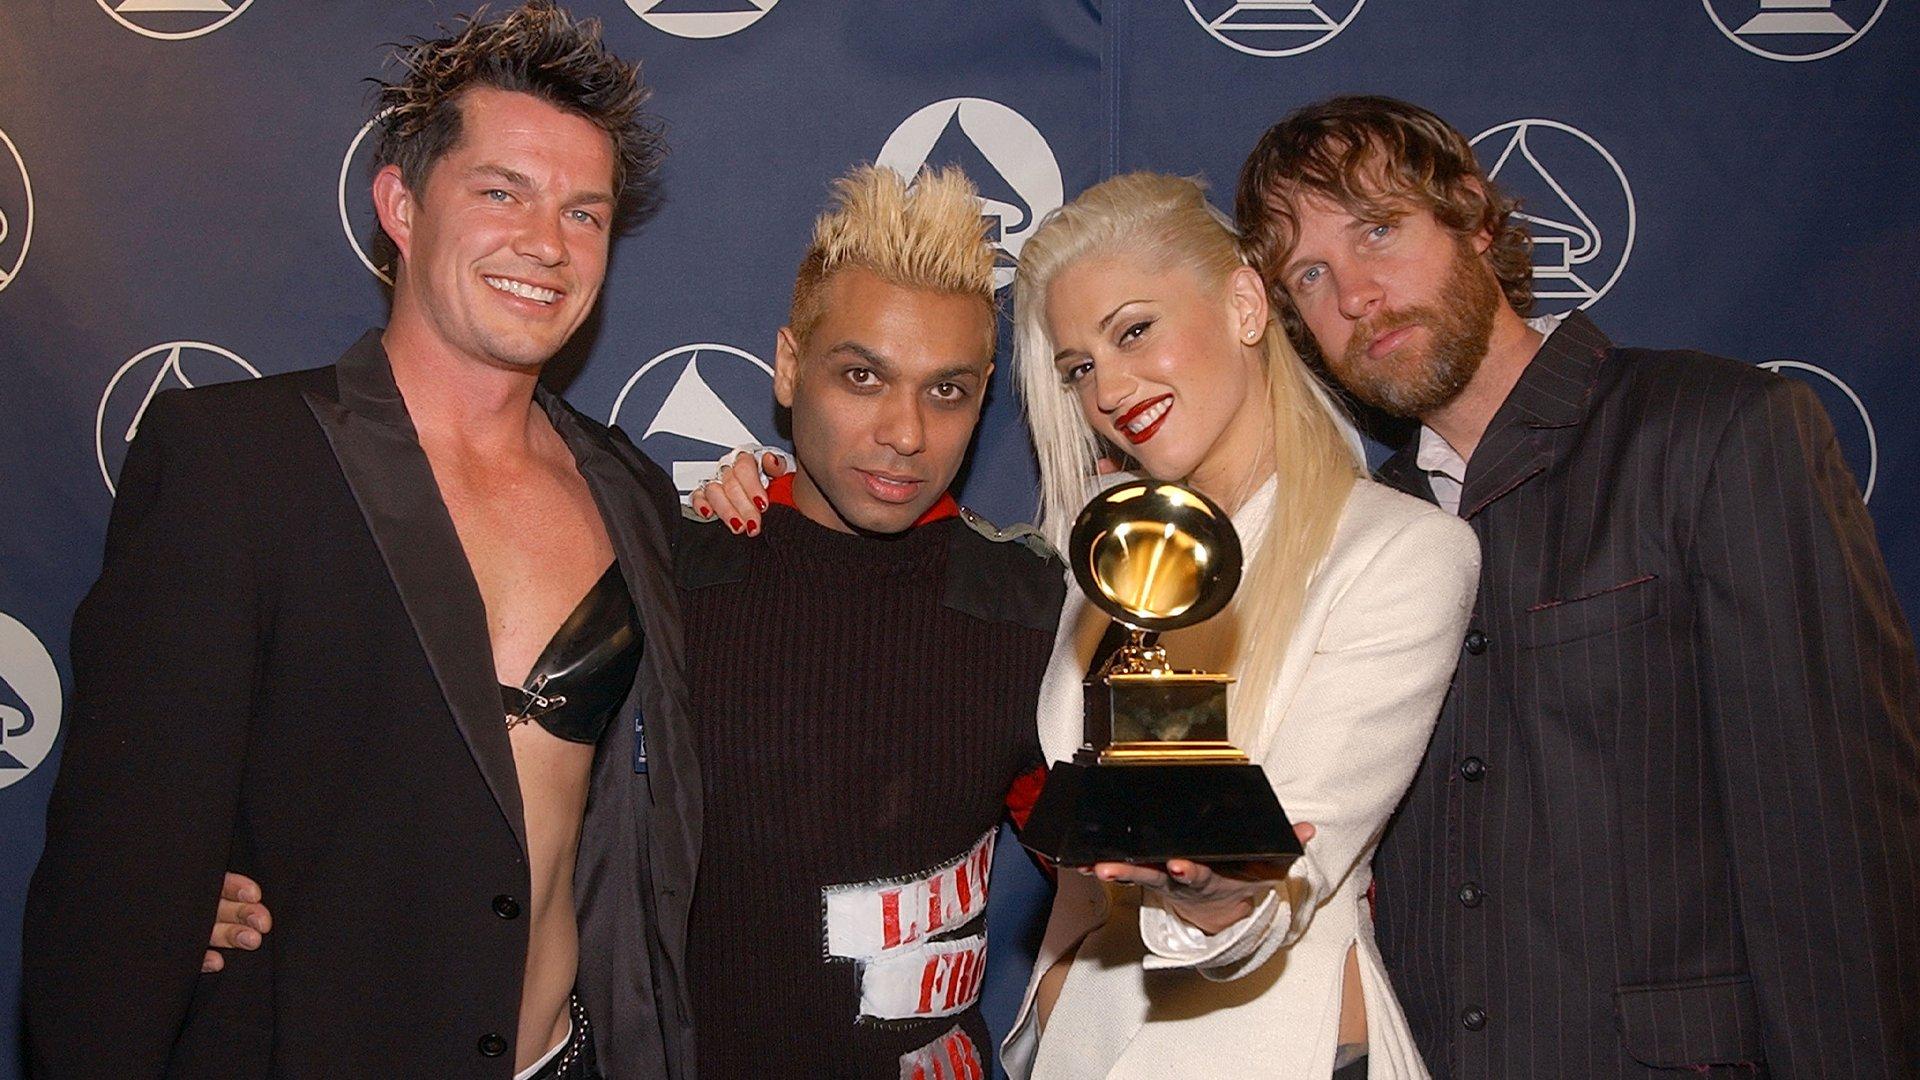 No Doubt pose backstage with GRAMMY at 2003 GRAMMYs